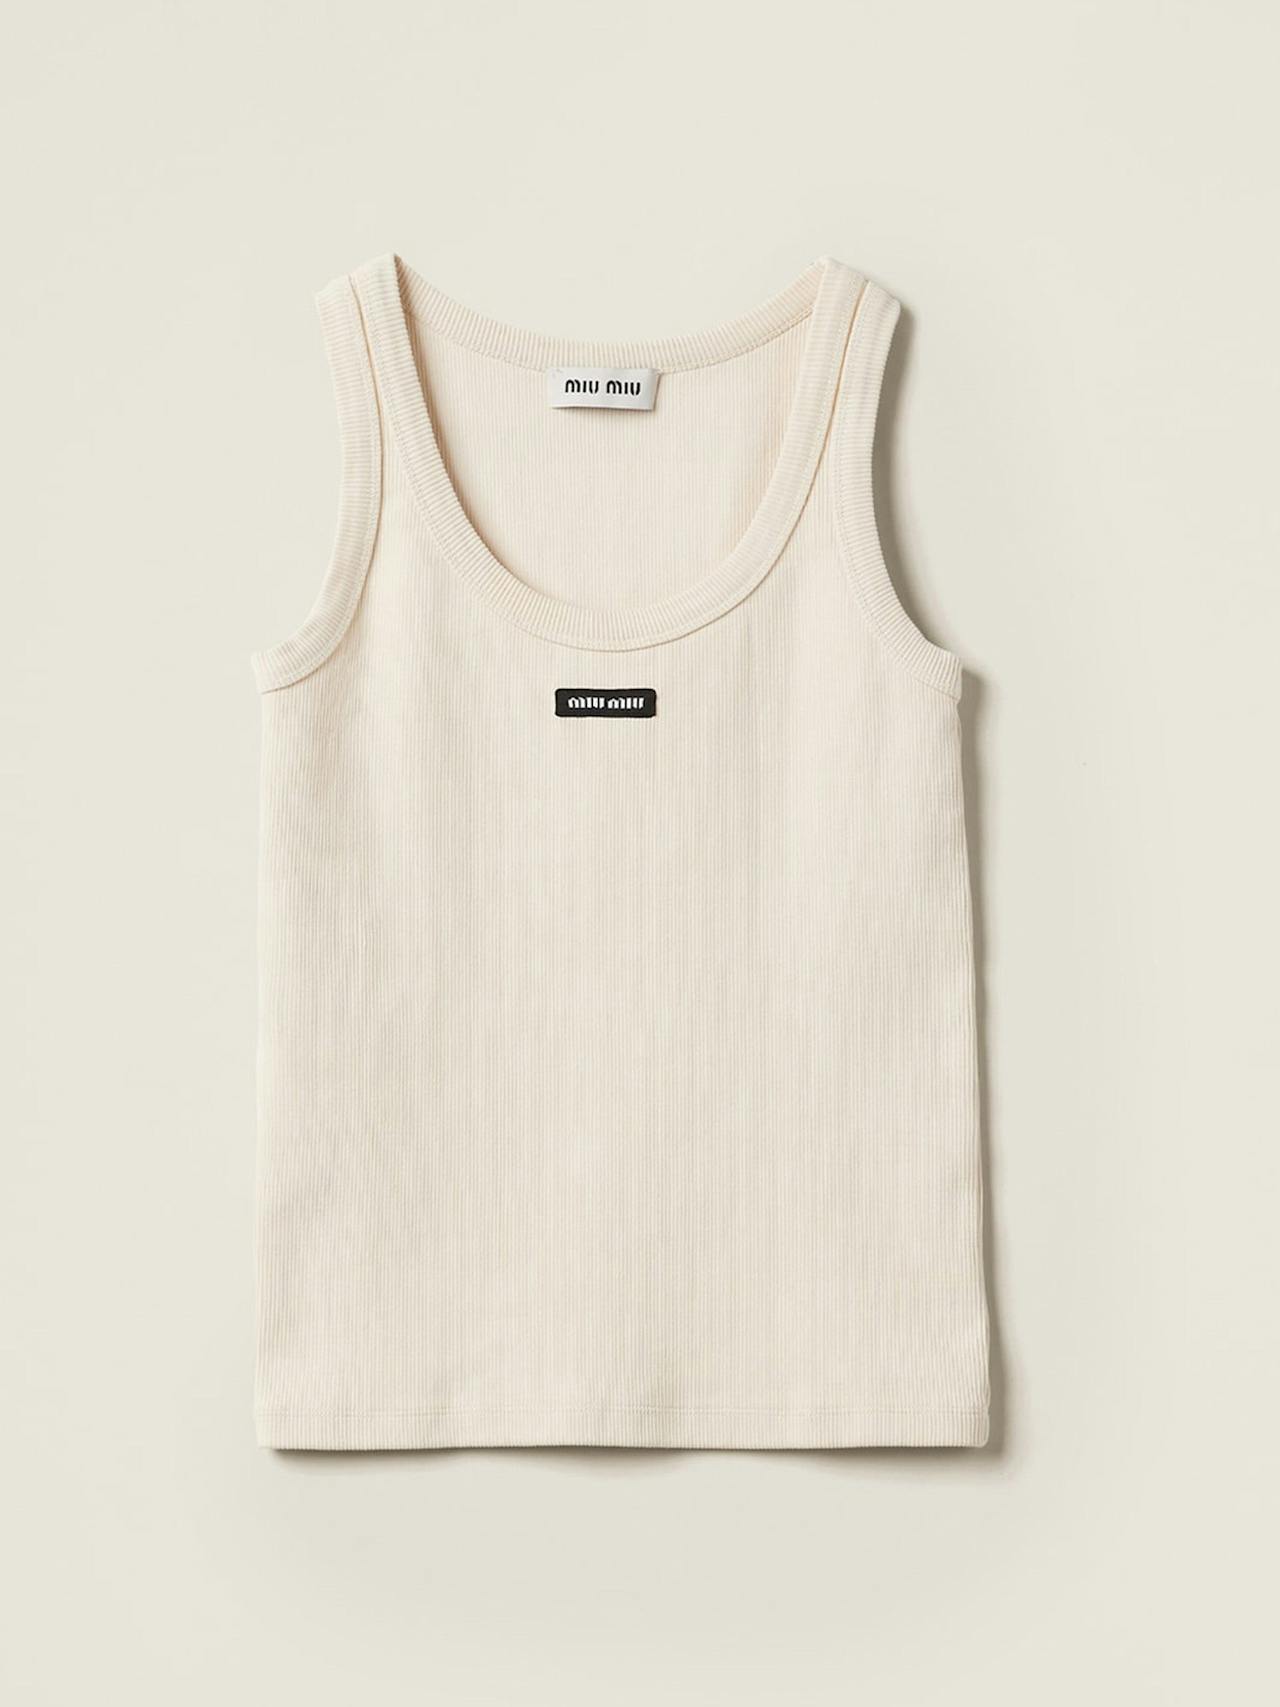 Garment-dyed ribbed knit jersey top